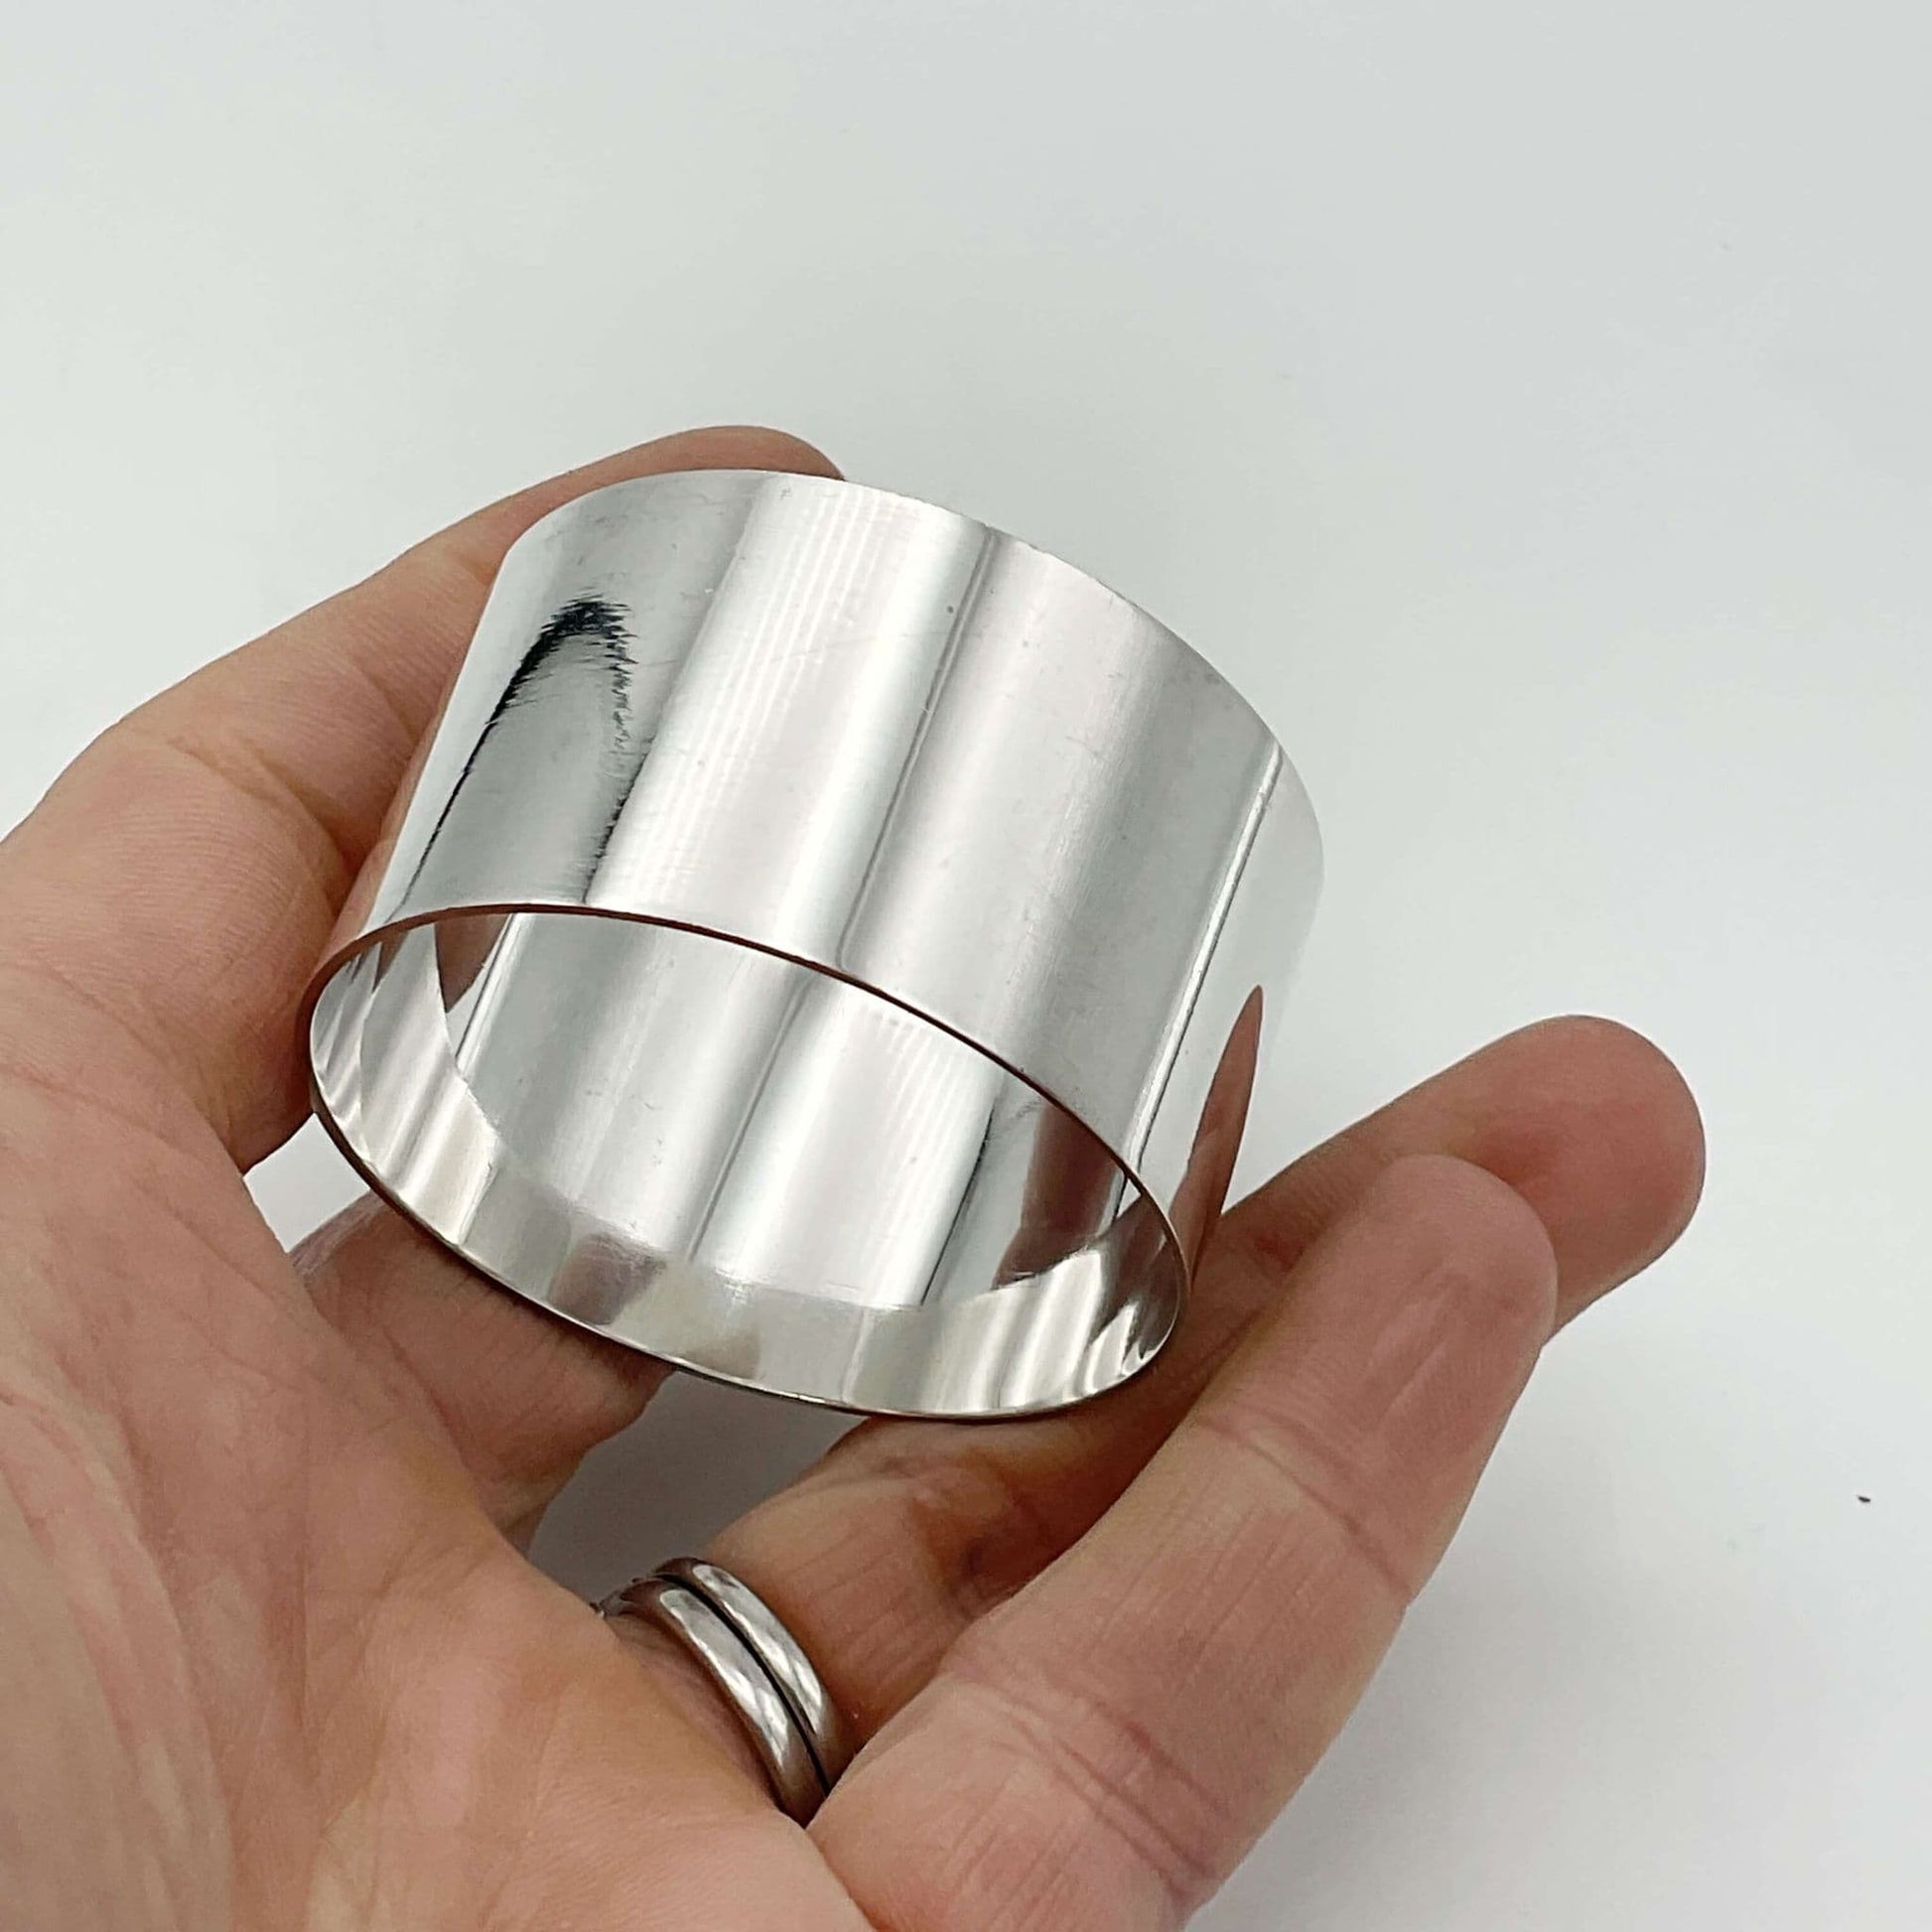 A lovely shiny silver napkin ring held in a hand